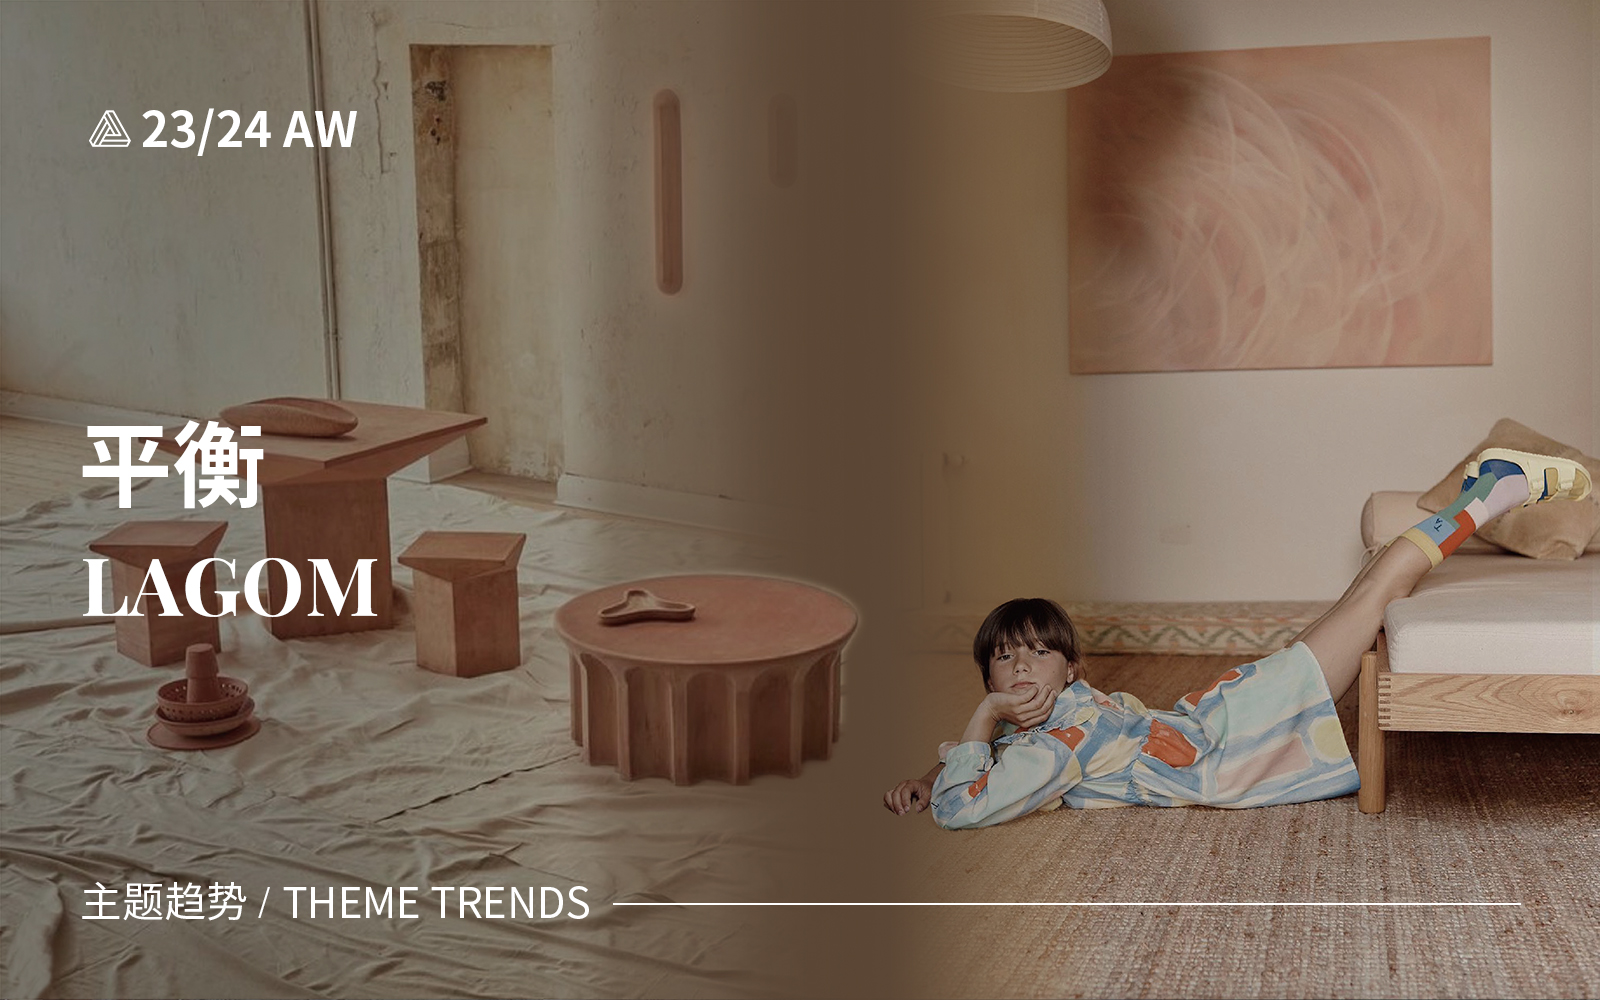 Lagom -- The A/W 23/24 Thematic Trend for Kidswear